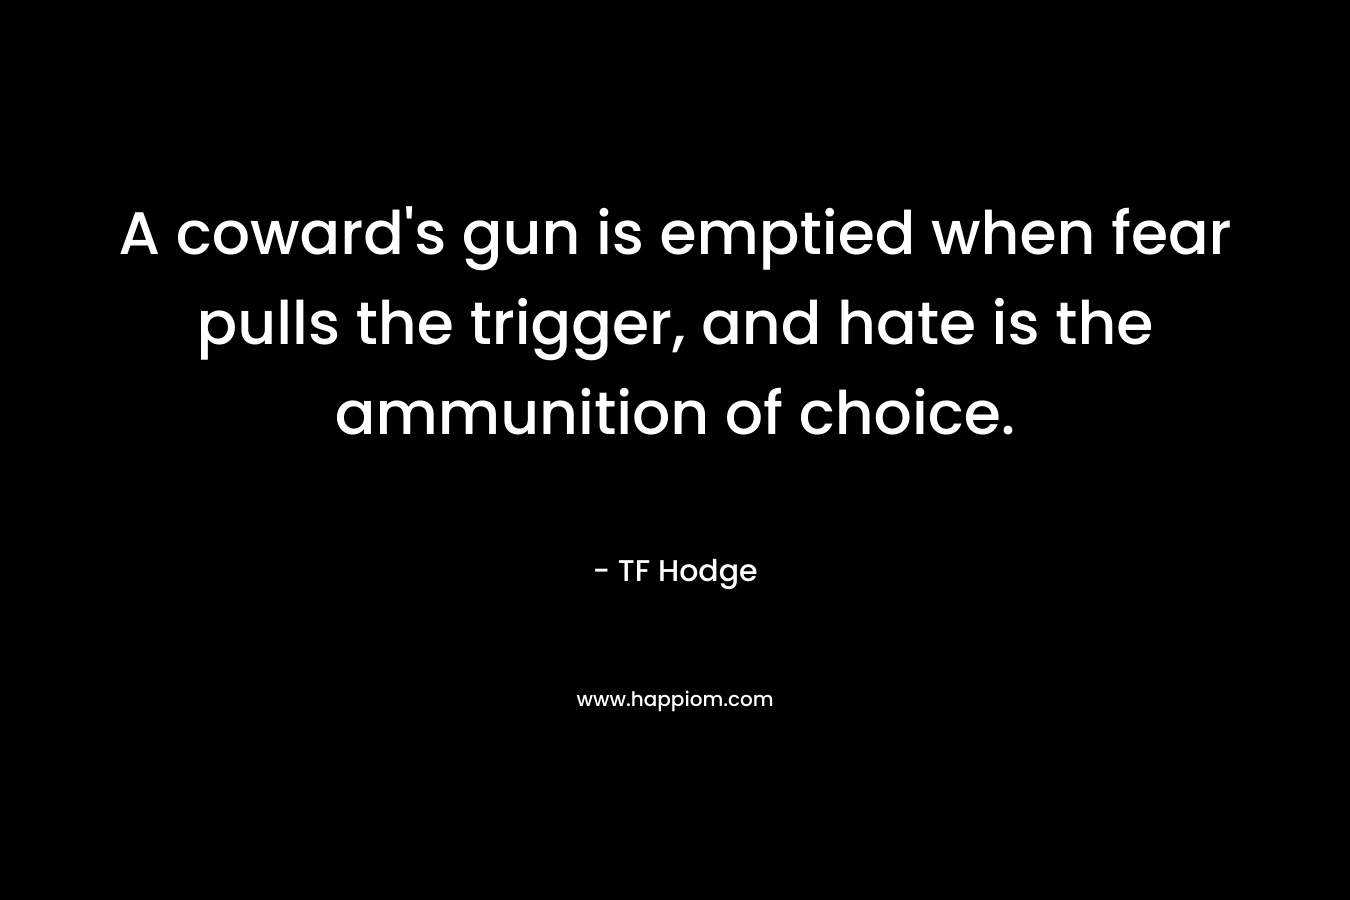 A coward’s gun is emptied when fear pulls the trigger, and hate is the ammunition of choice. – TF Hodge